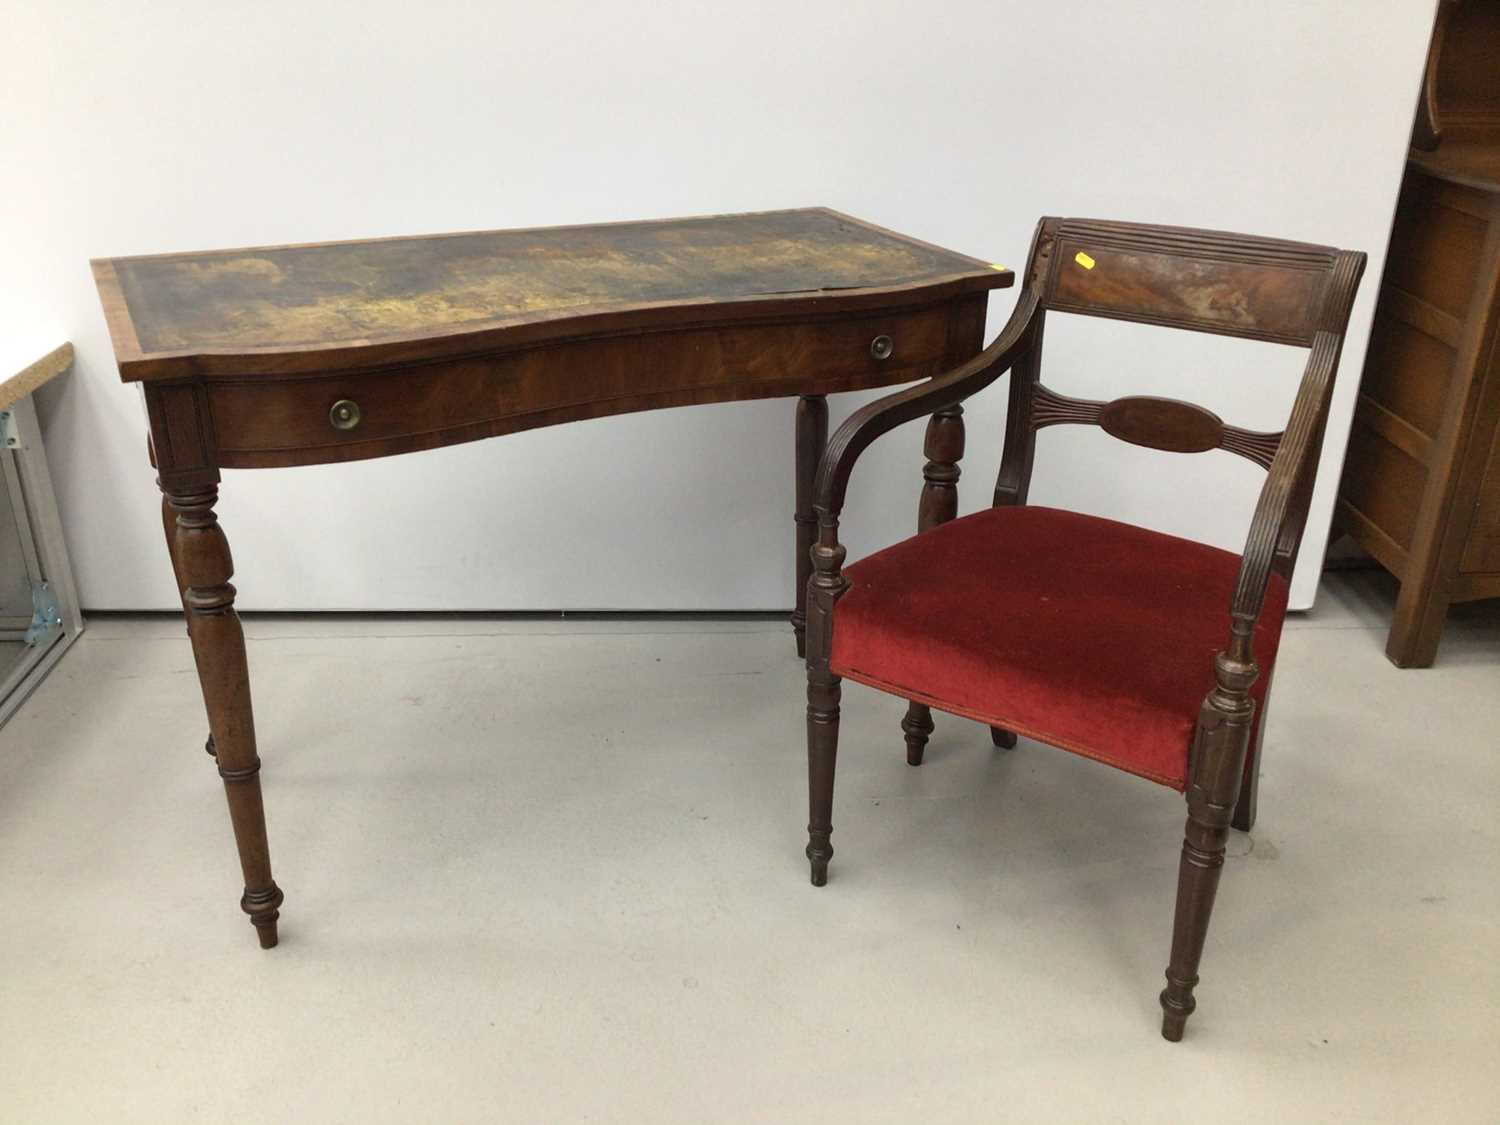 Lot 20 - Victorian figured mahogany serpentine front writing table, together with a Regency mahogany carver chair